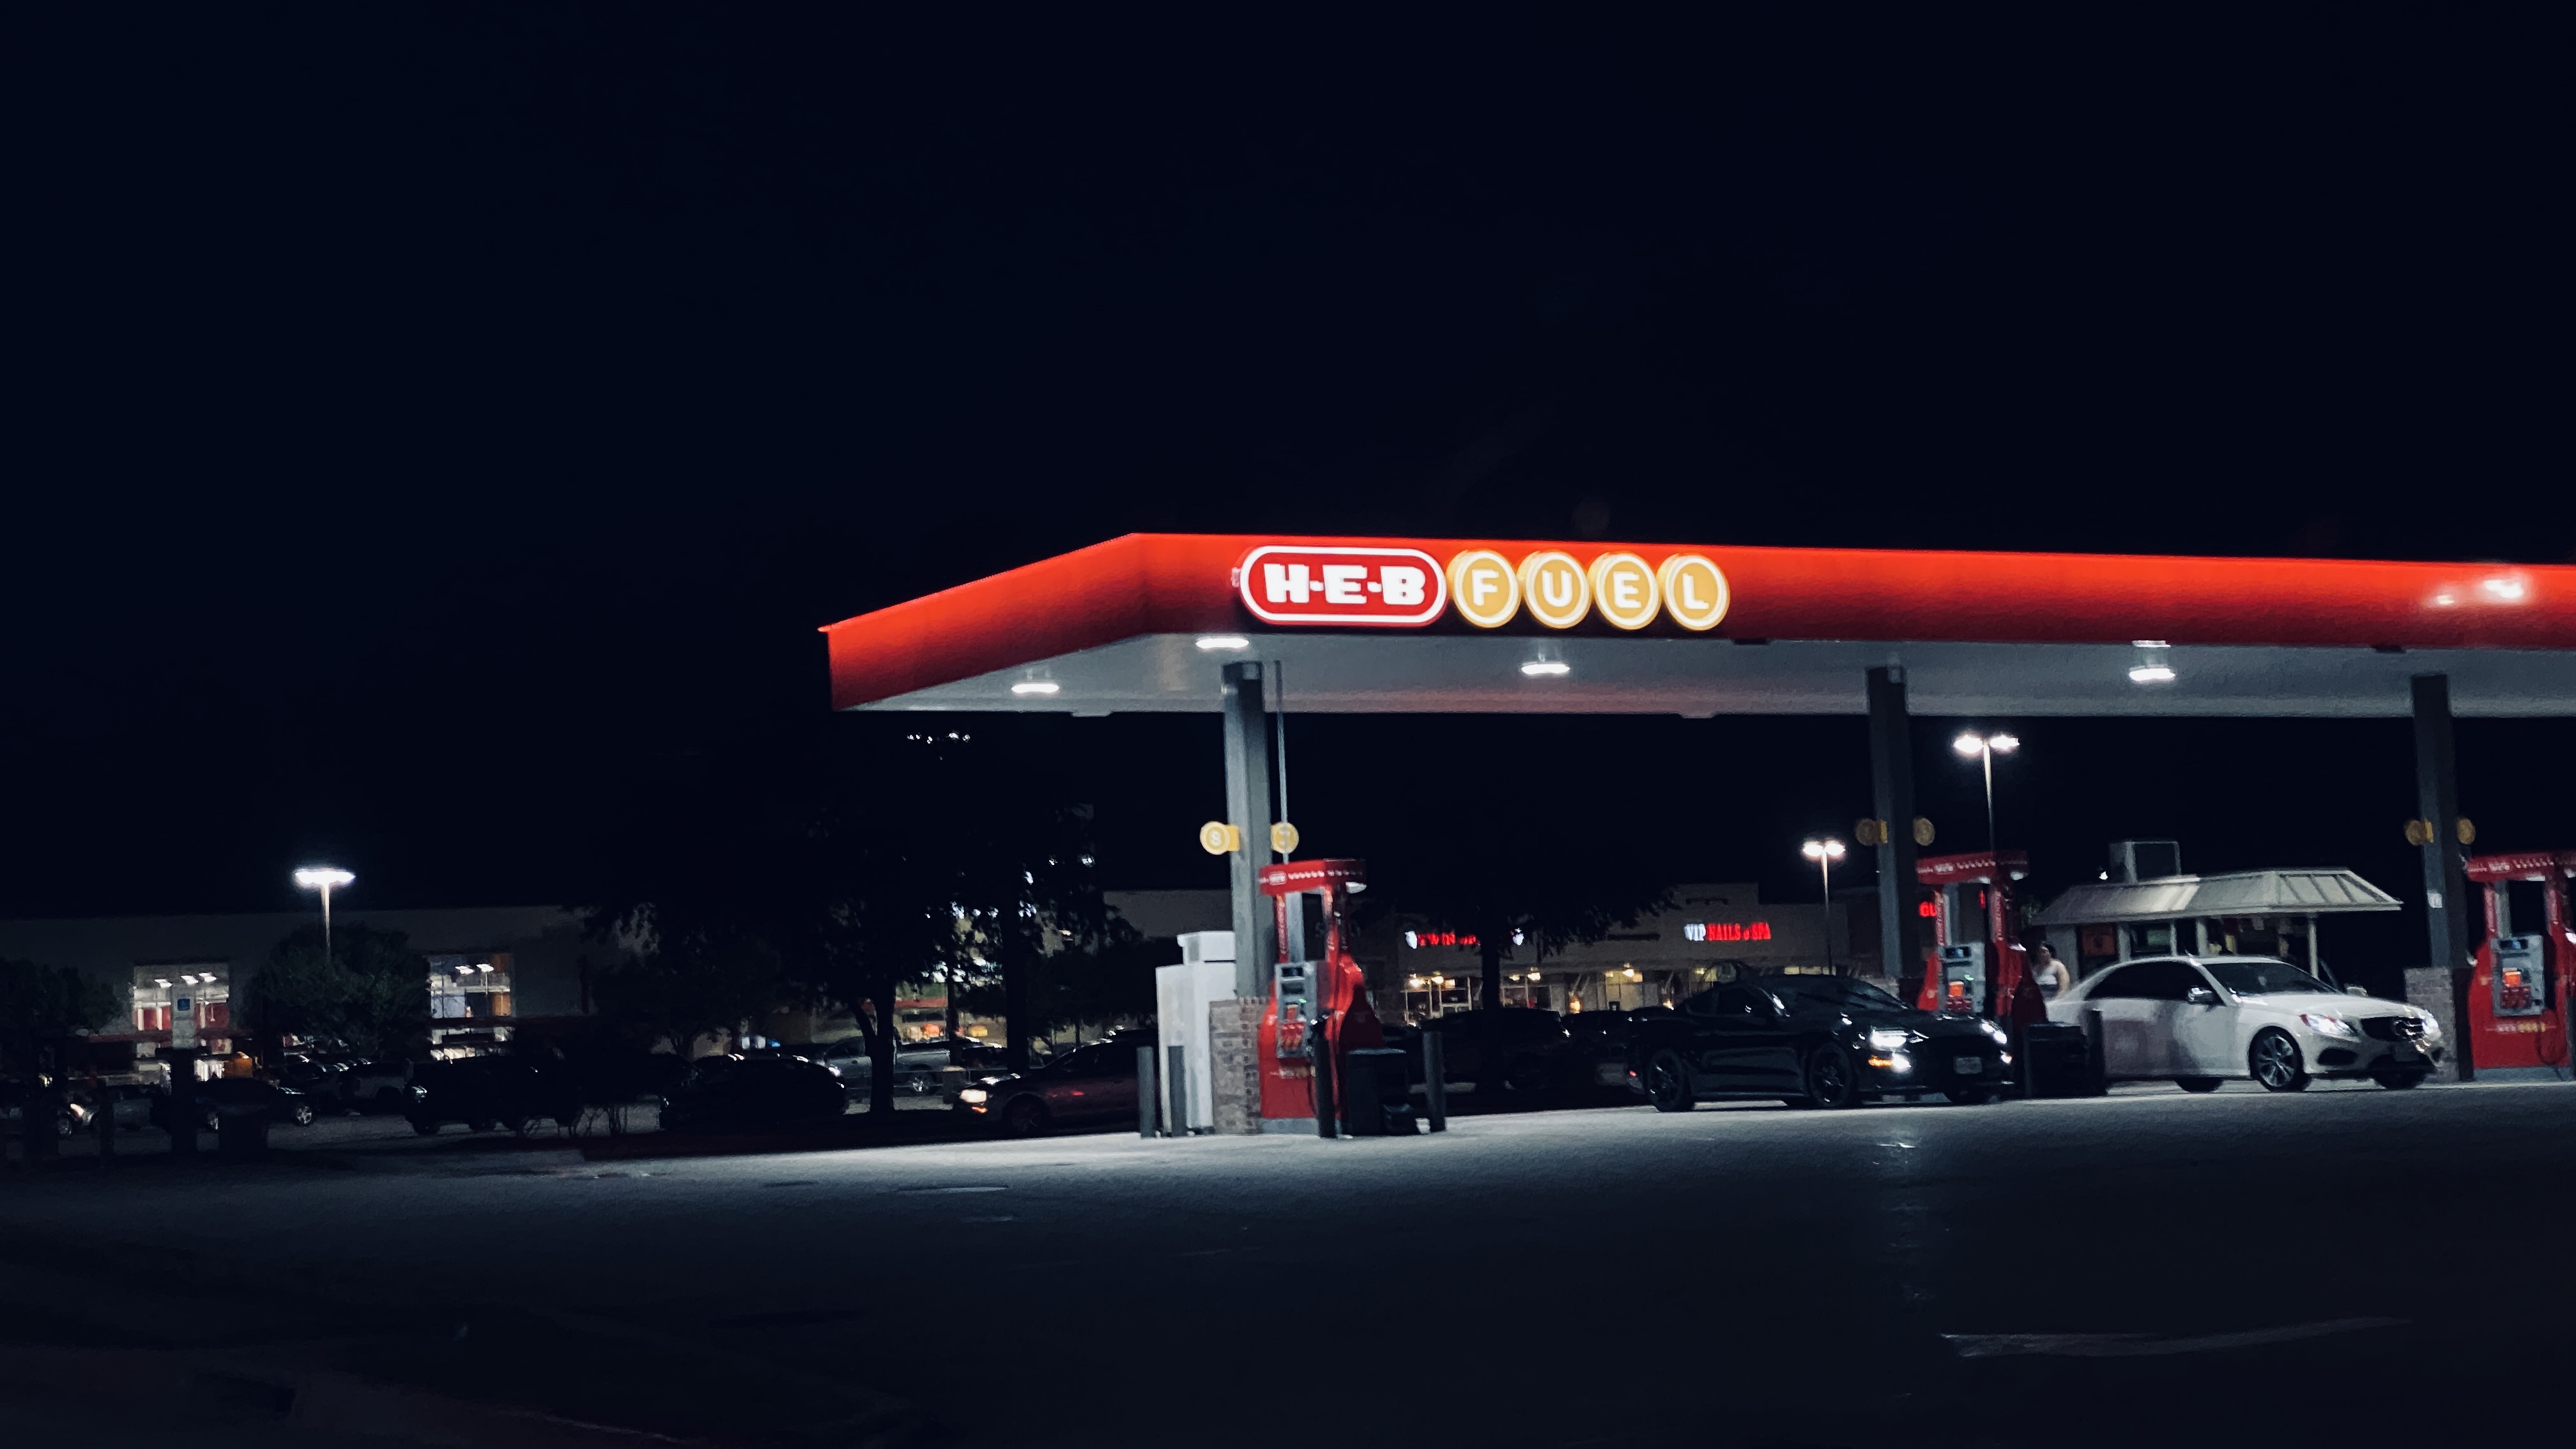 Reviews of “HEB Fuel” located by H-E-B Car Wash in Atascocita, Texas ...